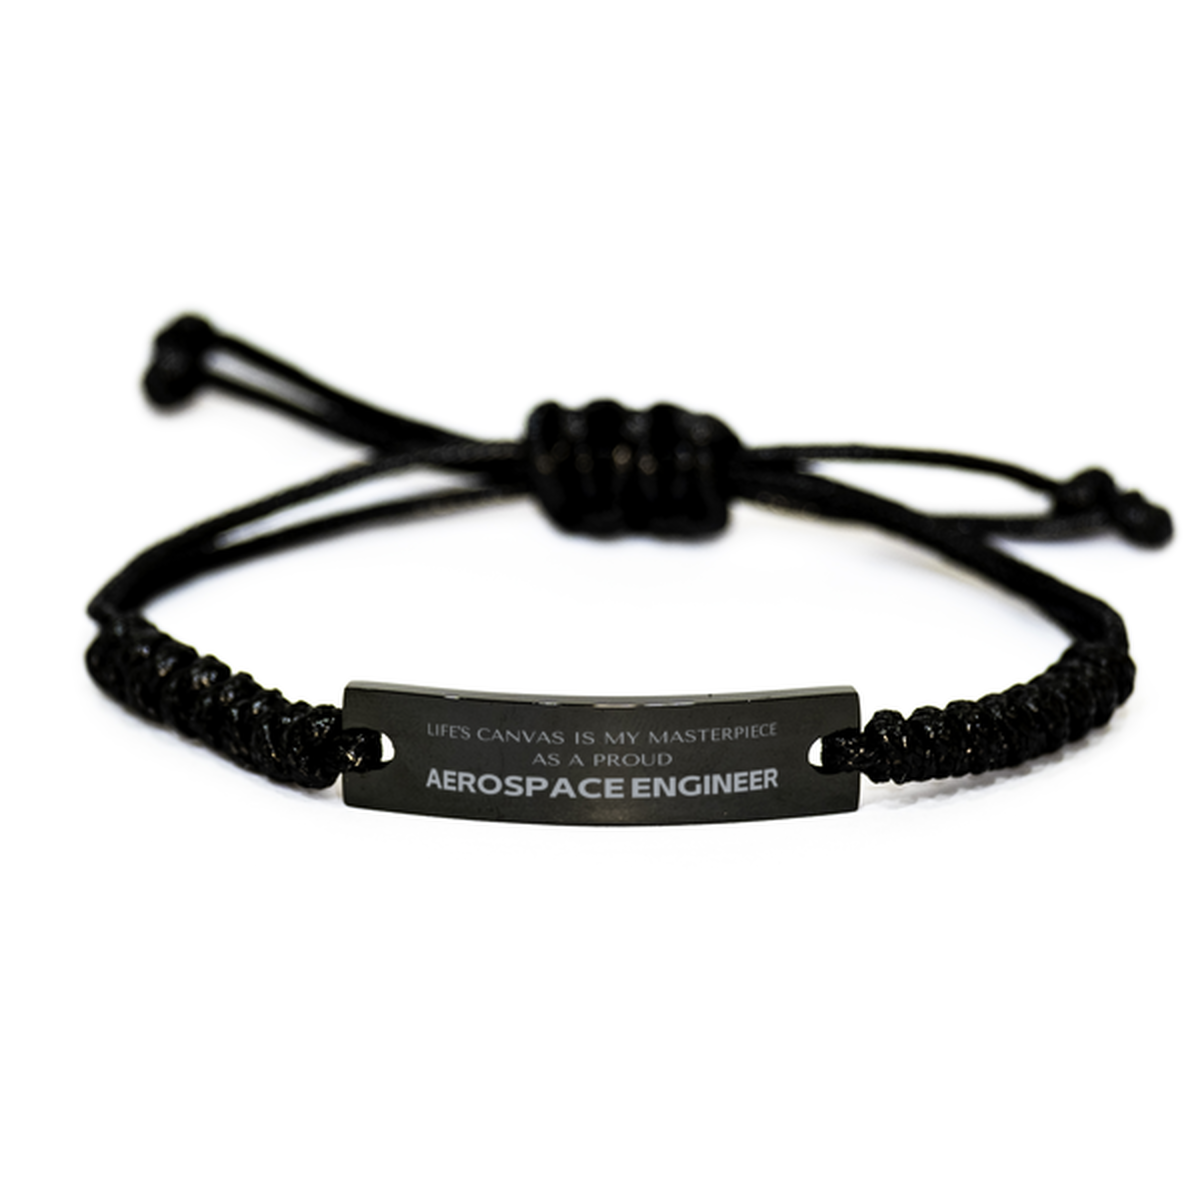 Proud Aerospace Engineer Gifts, Life's canvas is my masterpiece, Epic Birthday Christmas Unique Black Rope Bracelet For Aerospace Engineer, Coworkers, Men, Women, Friends